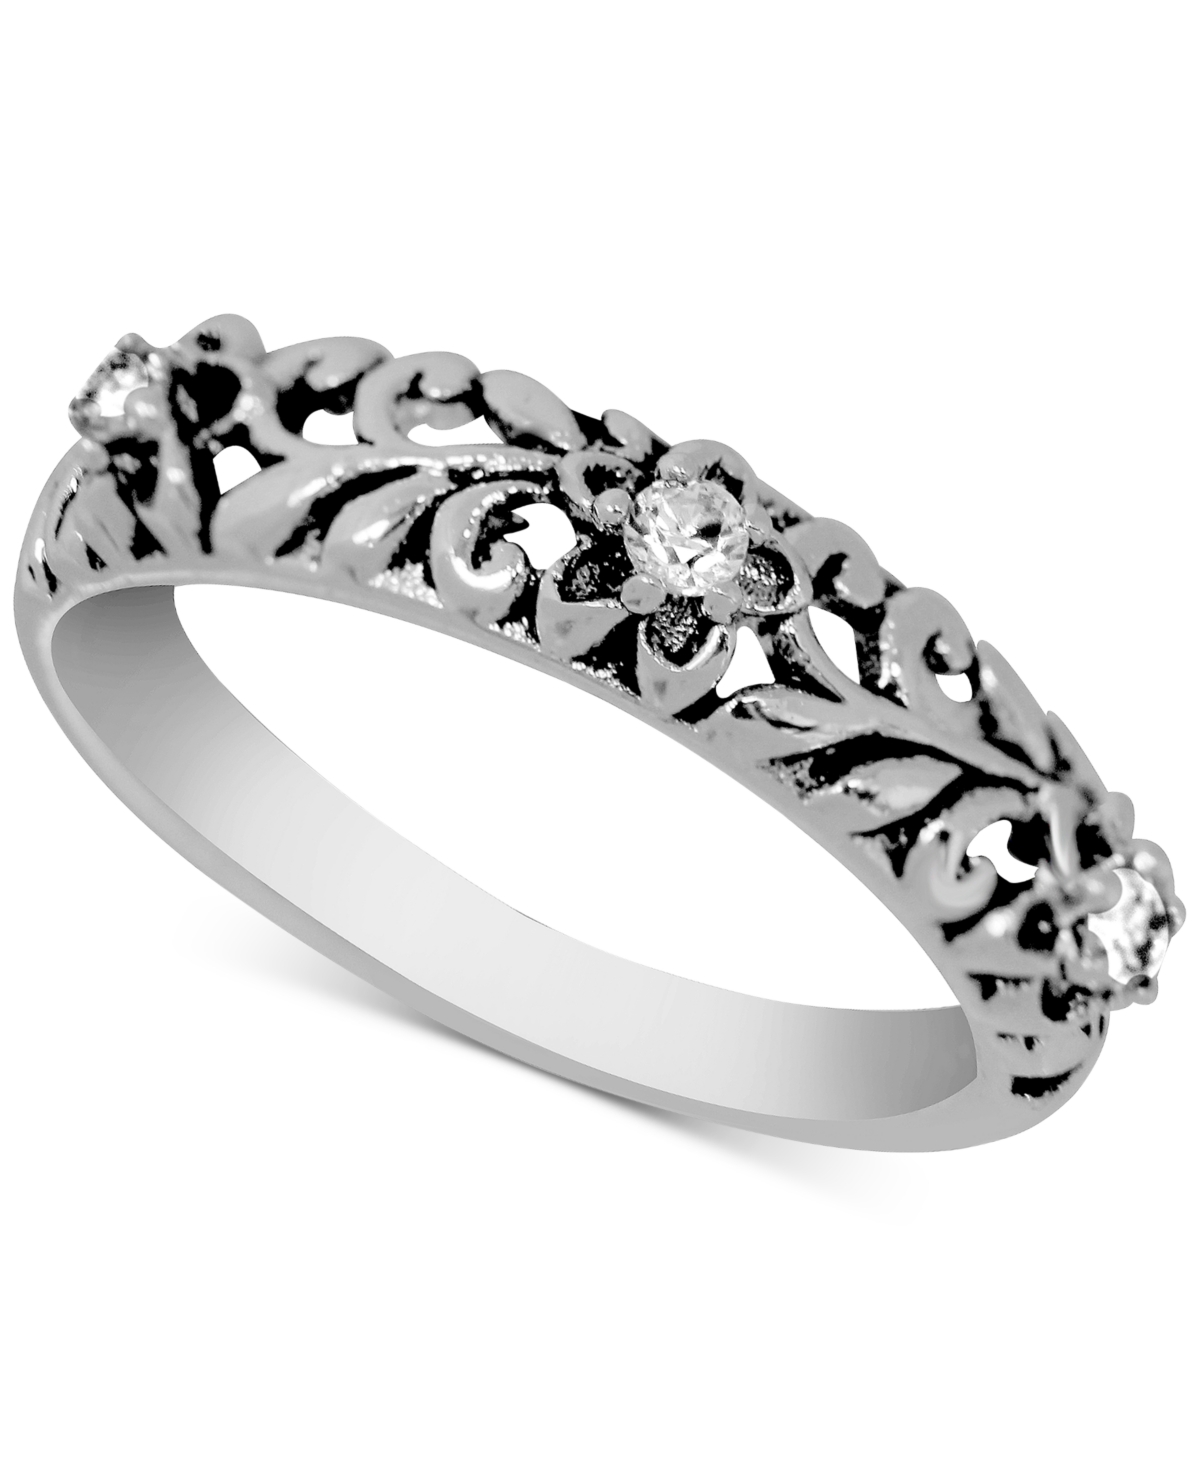 Cubic Zirconia Filigree Band in Silver-Plate - Silver